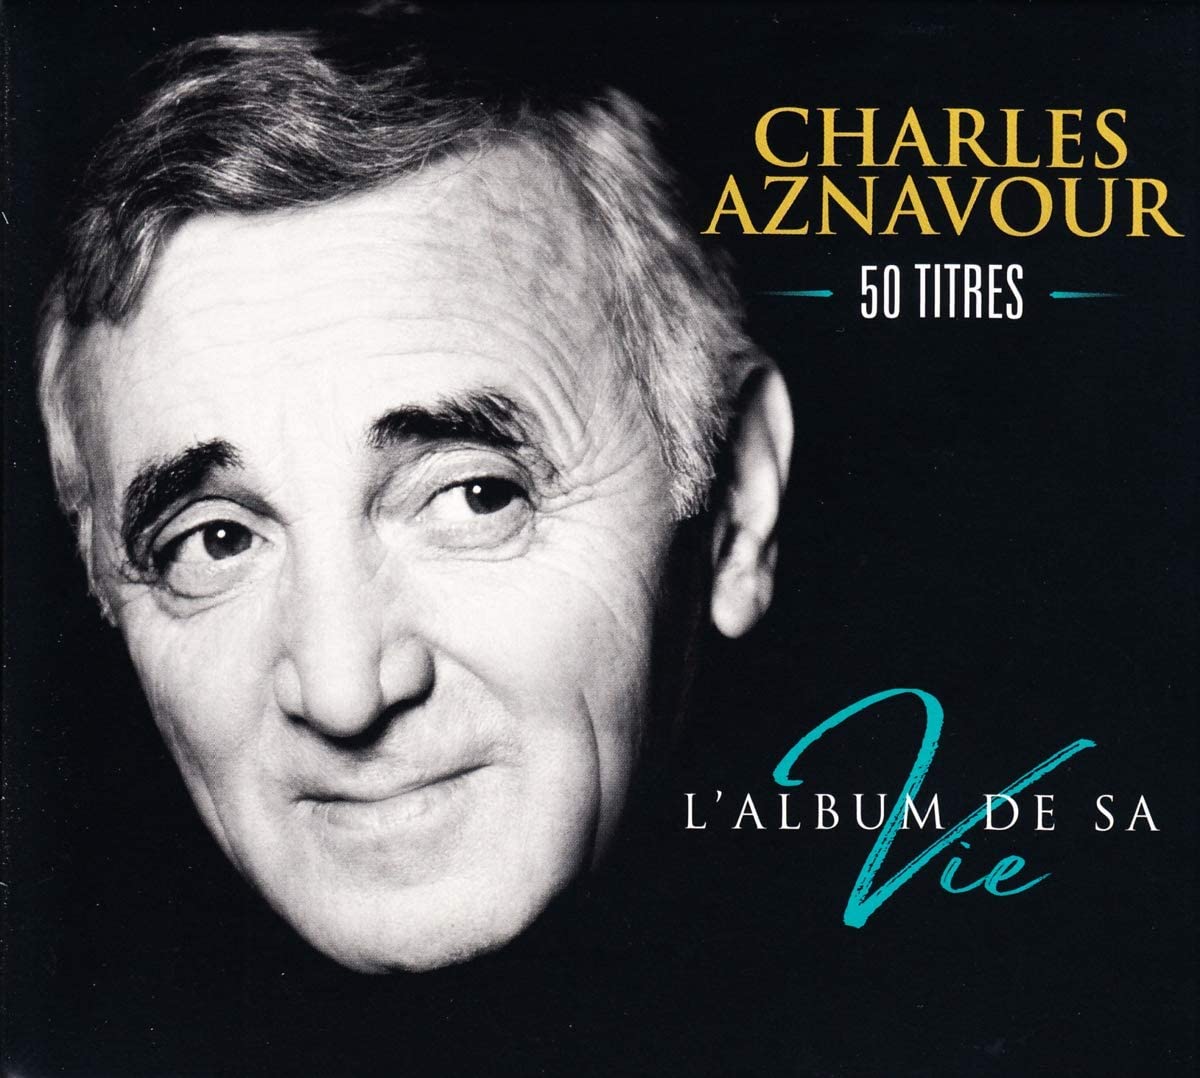 Charles Aznavour, Morire d'amore